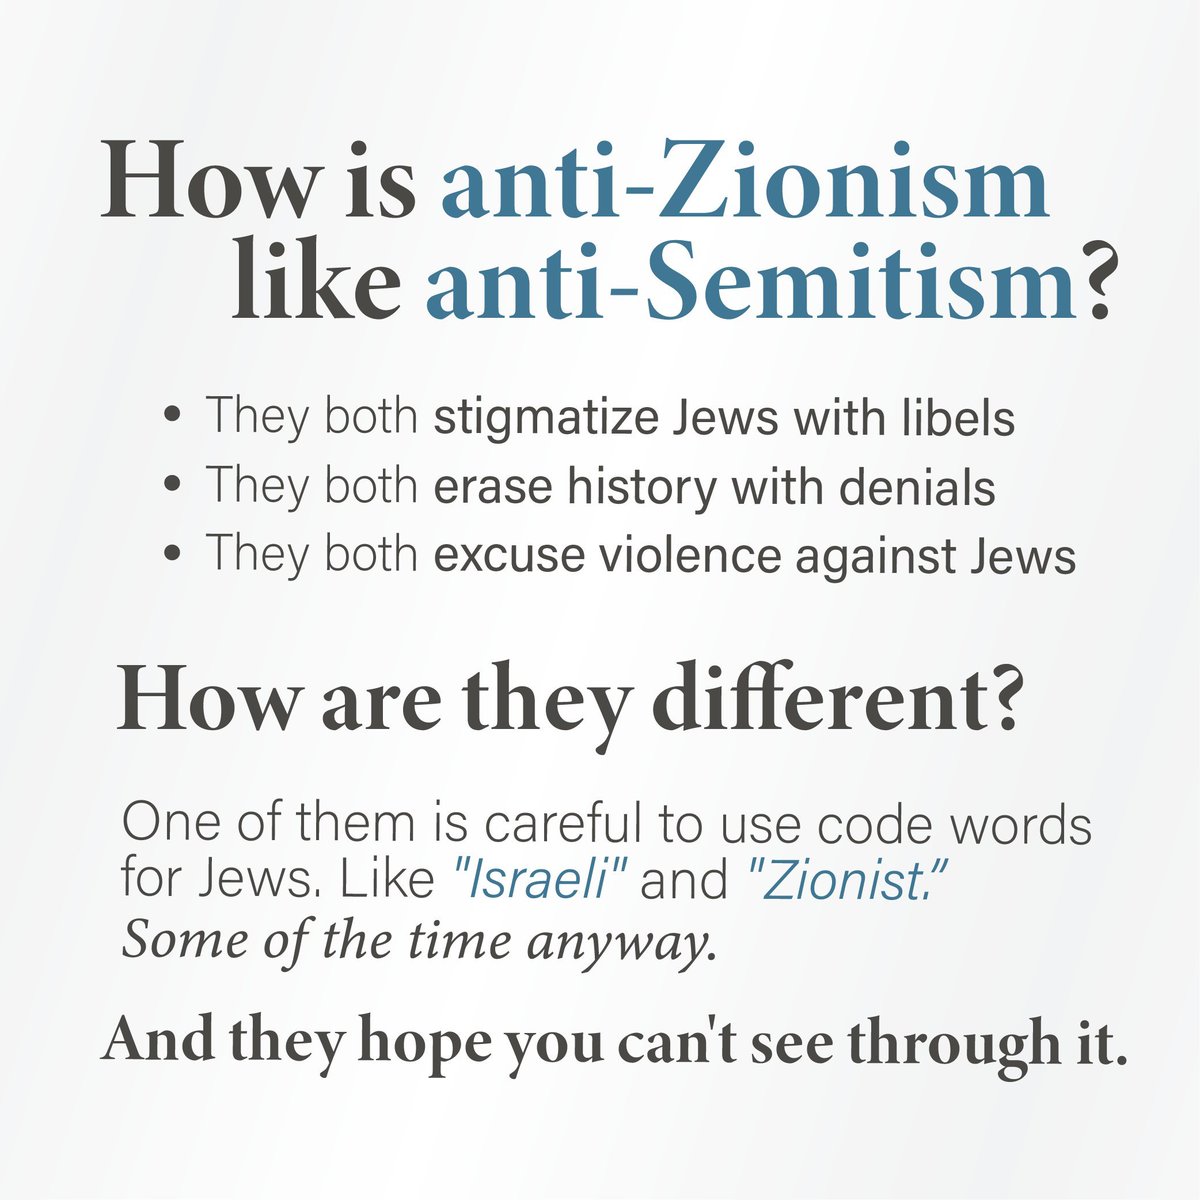 What's the difference between an anti-Zionism and an anti-Semitism?  None.  
Every Jew is a Zionist, but not every Zionist is a Jew.  
Being an anti-Semite, you are 100% against Jews.  but, being an anti-Zionist, you are against not only Jews but also those who call themselves…